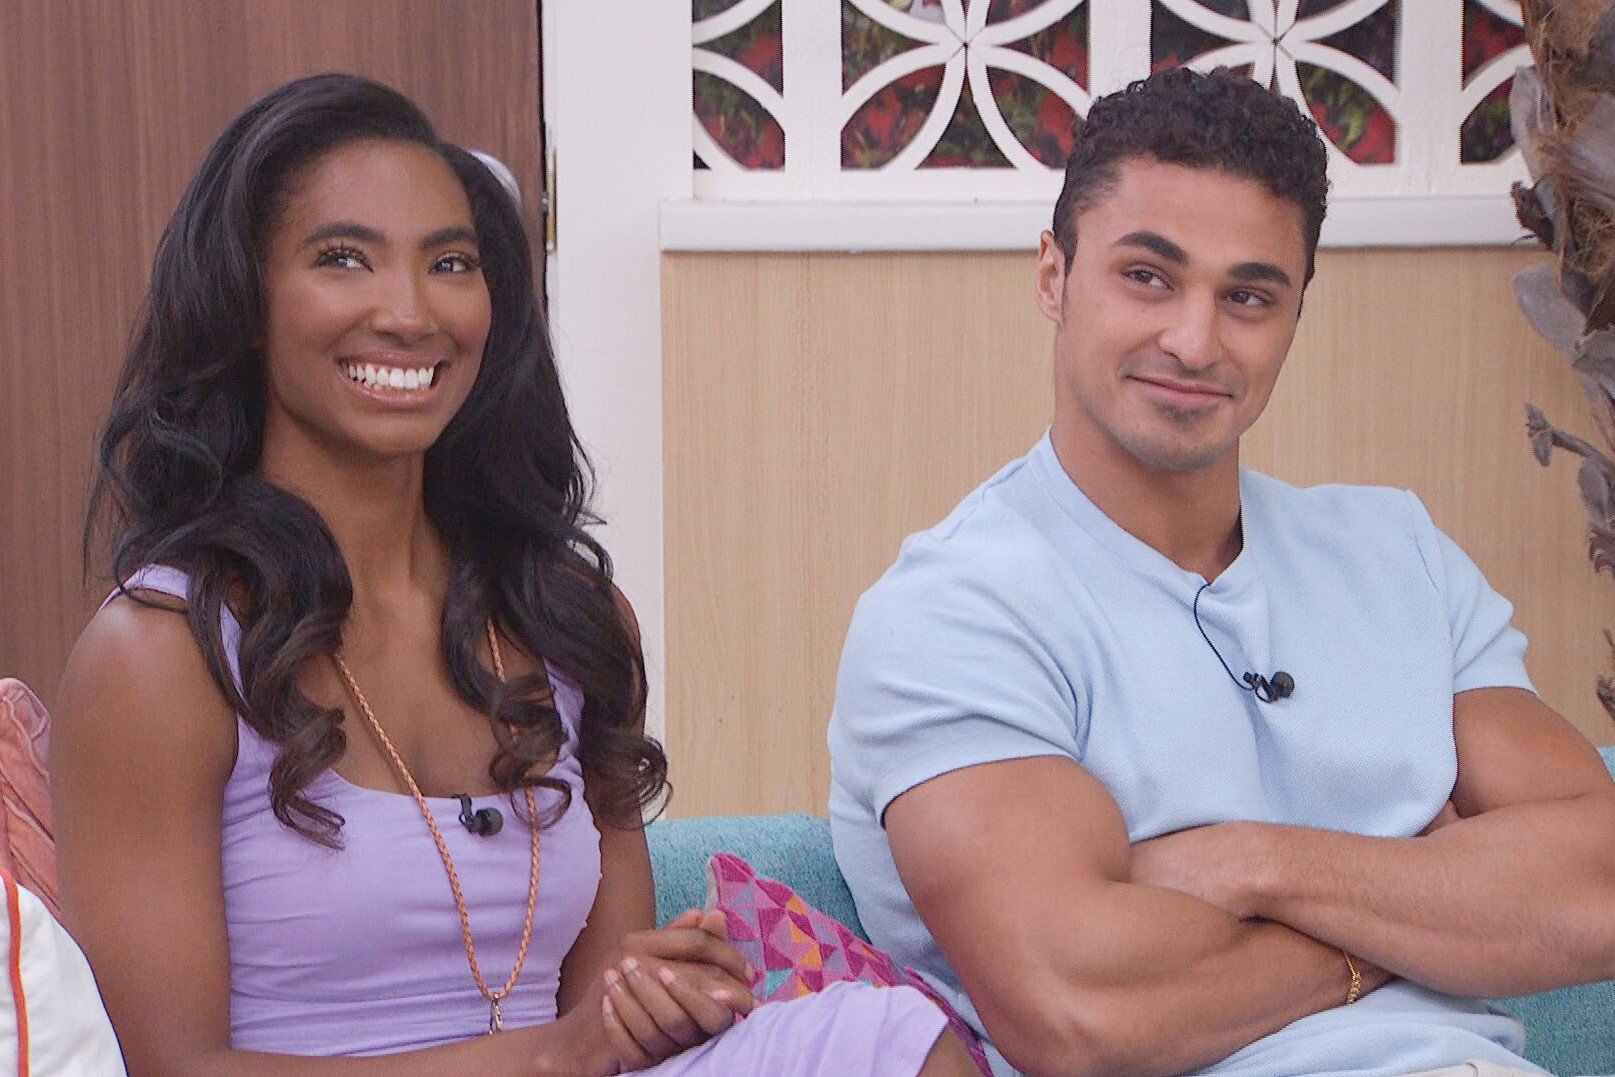 Taylor Hale and Joseph Abdin, who starred together in 'Big Brother 24' on CBS, sit next to each other on a couch.